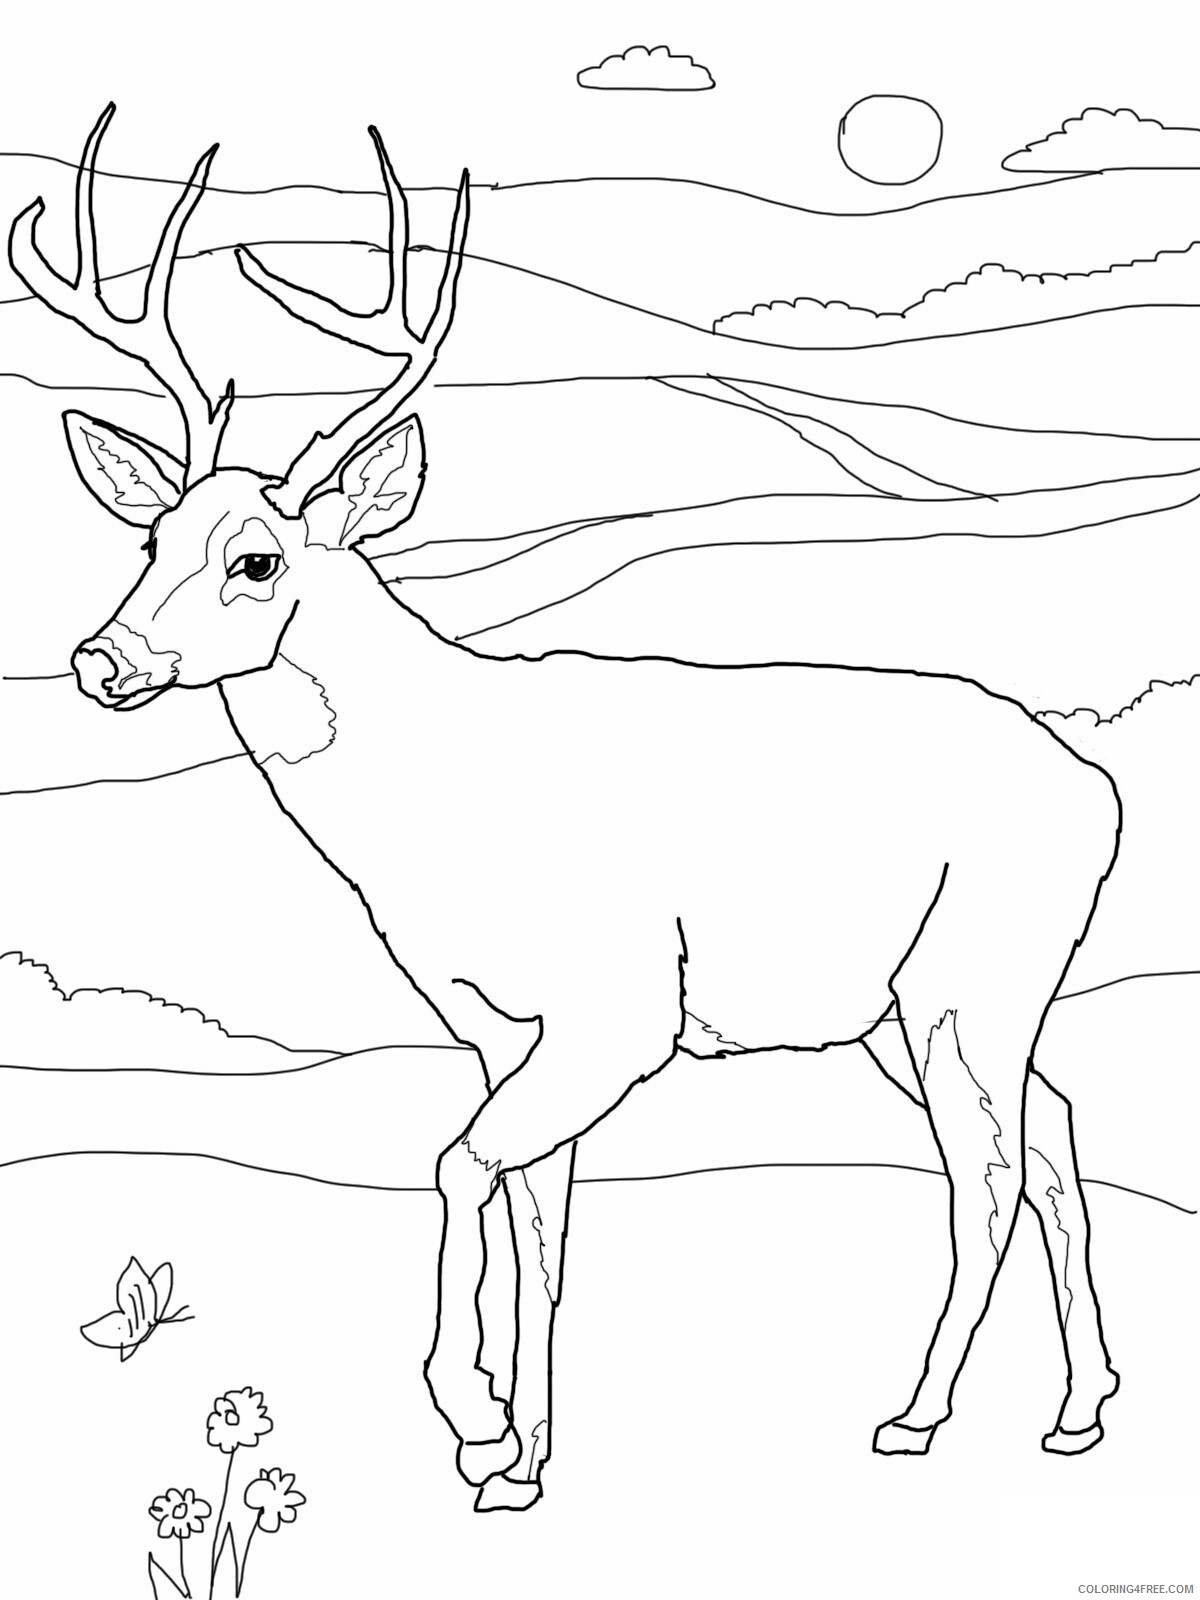 Deer Coloring Pages Animal Printable Sheets Whitetail Deer 2021 1452 Coloring4free